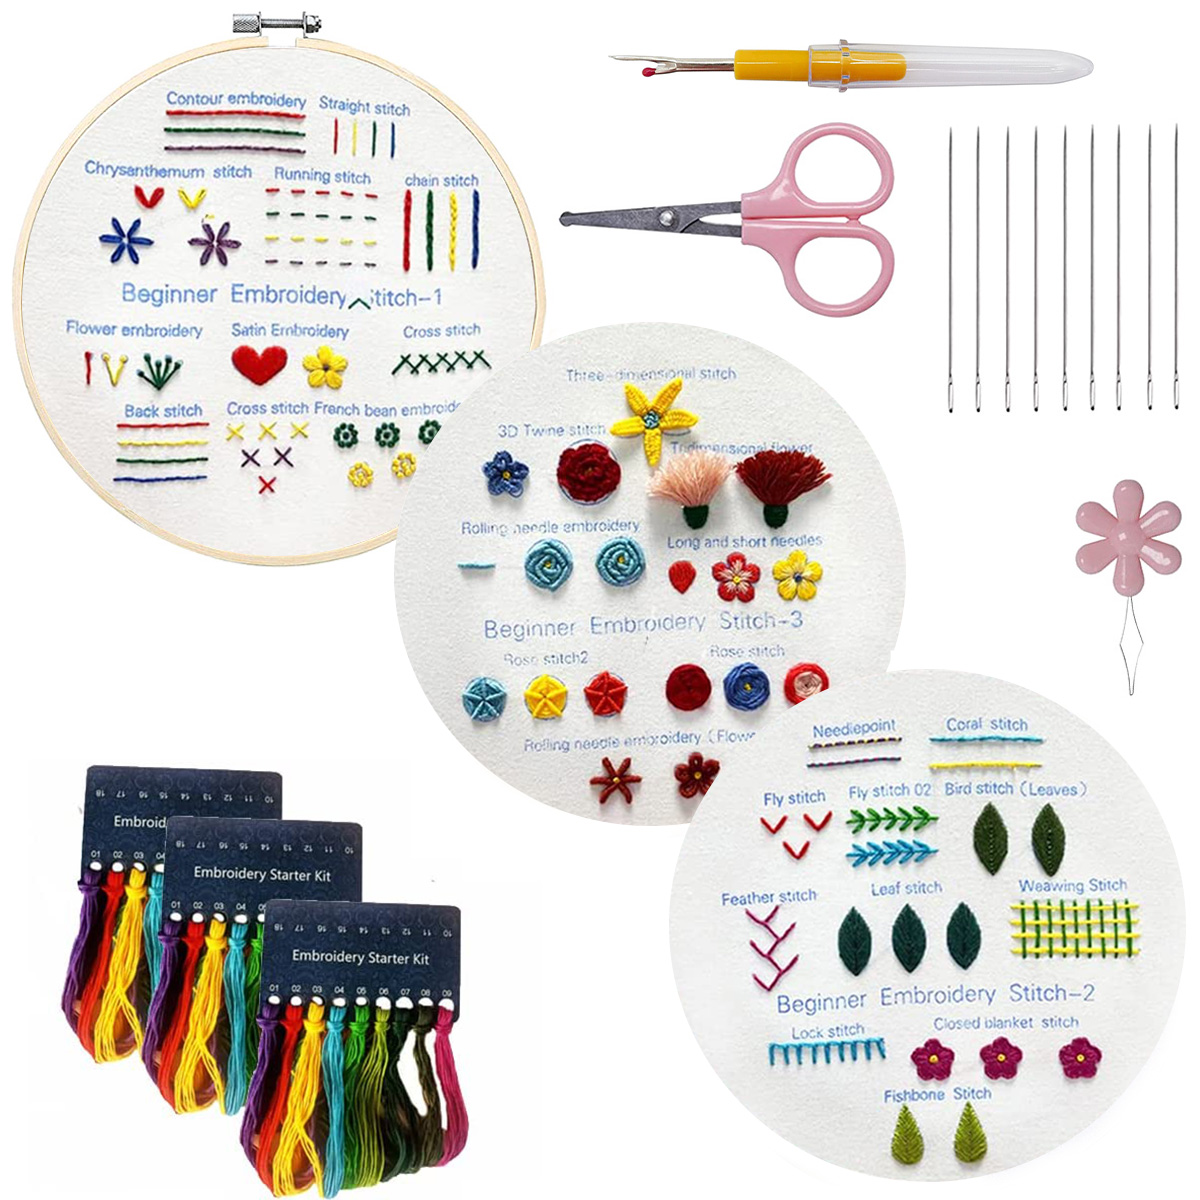 DIY Embroidery Stitch Practice Kit Handmade Embroidery Starter Kit to Learn 30 Different Stitches Hand Stitch Embroidery Skill Techniques for